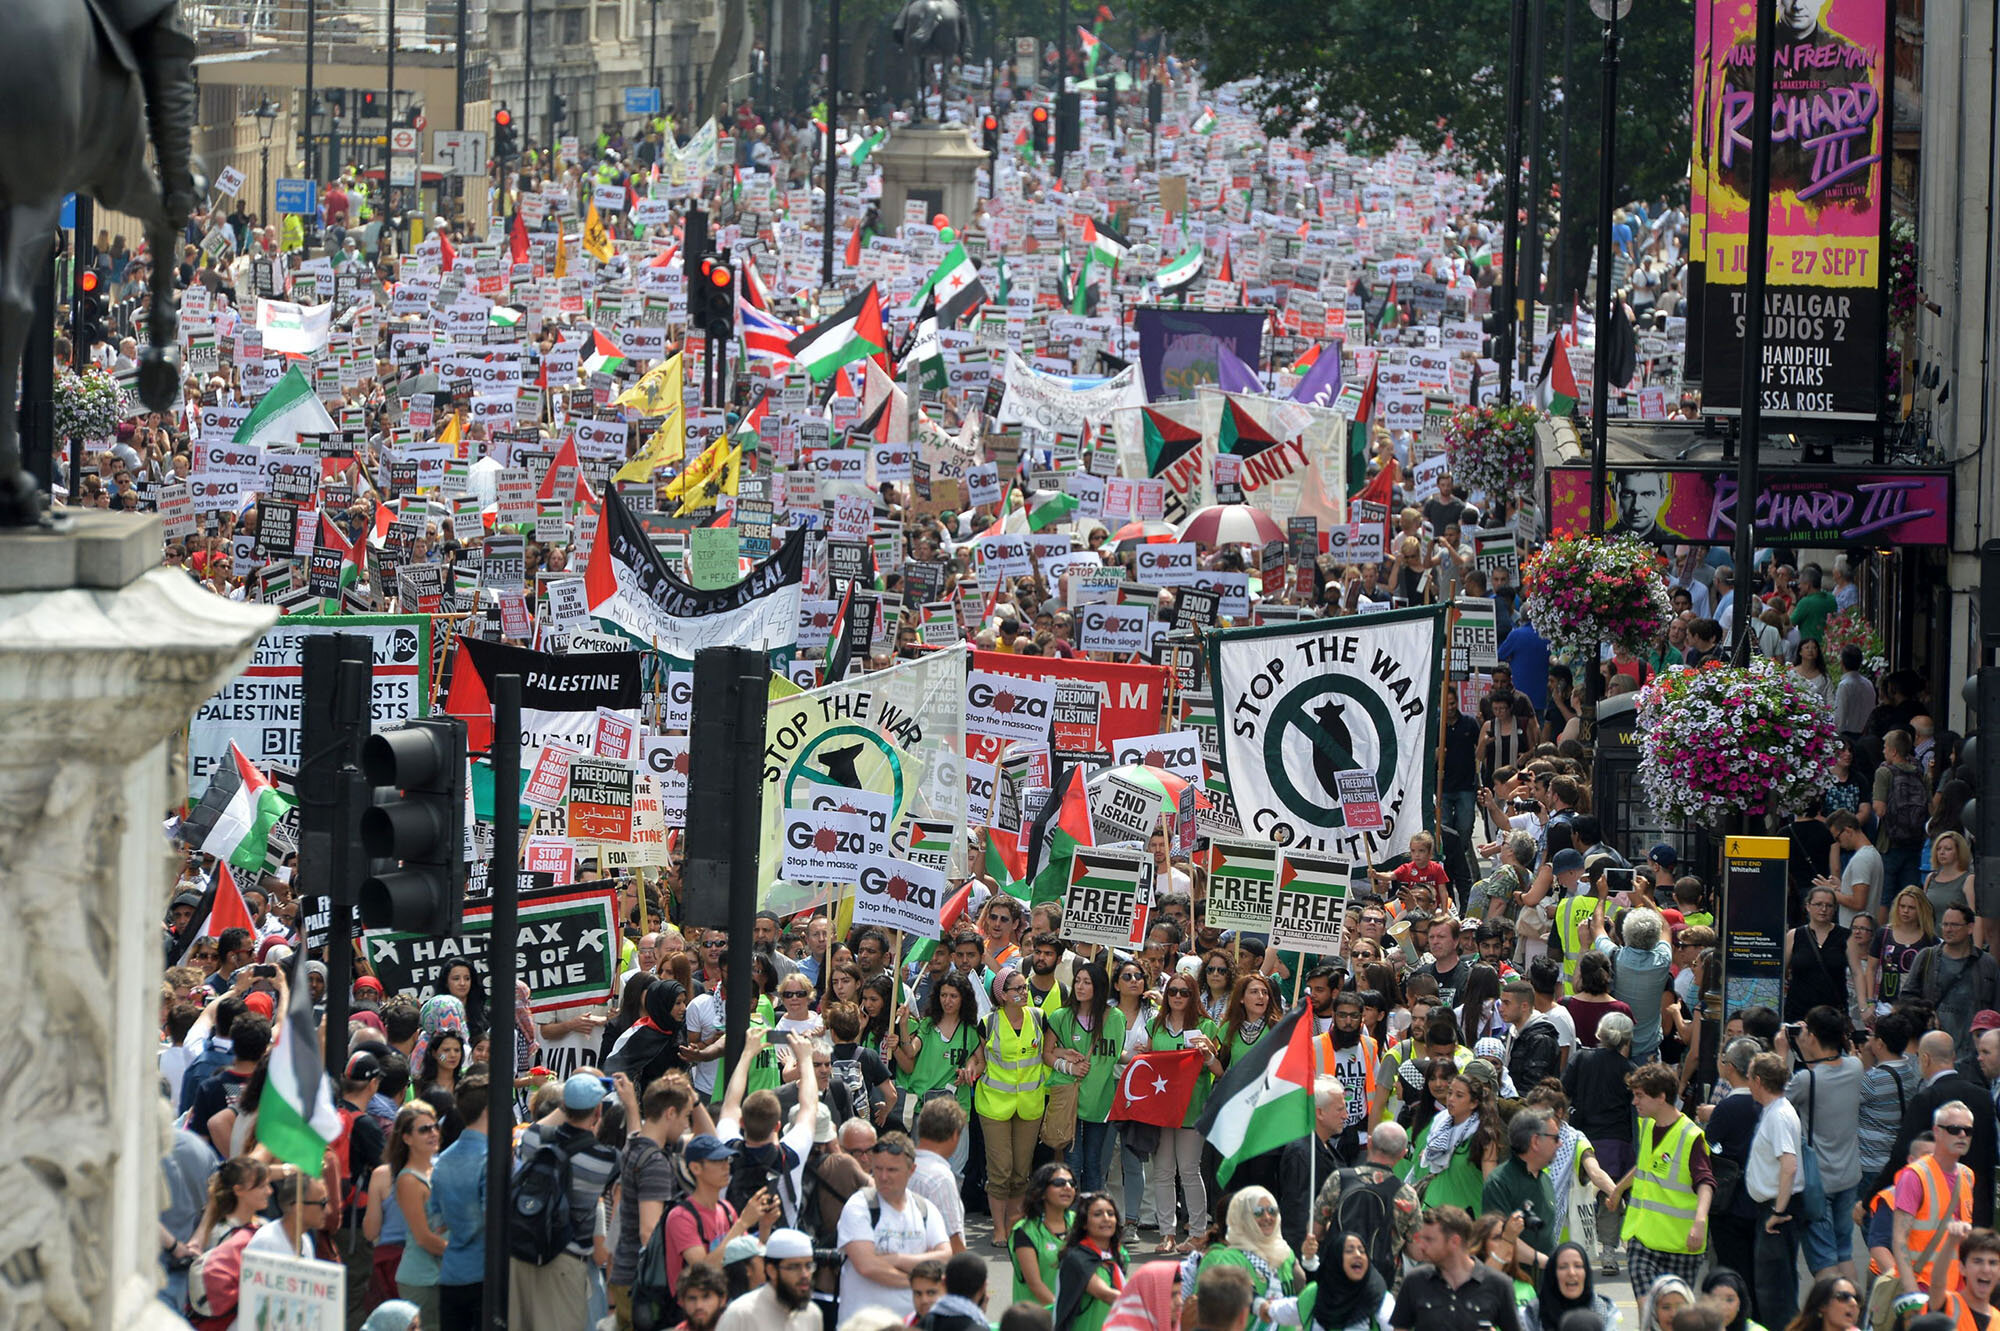 Over 150,000 Londoners marched to stop the war on Gaza in 2014 (AP file photo).